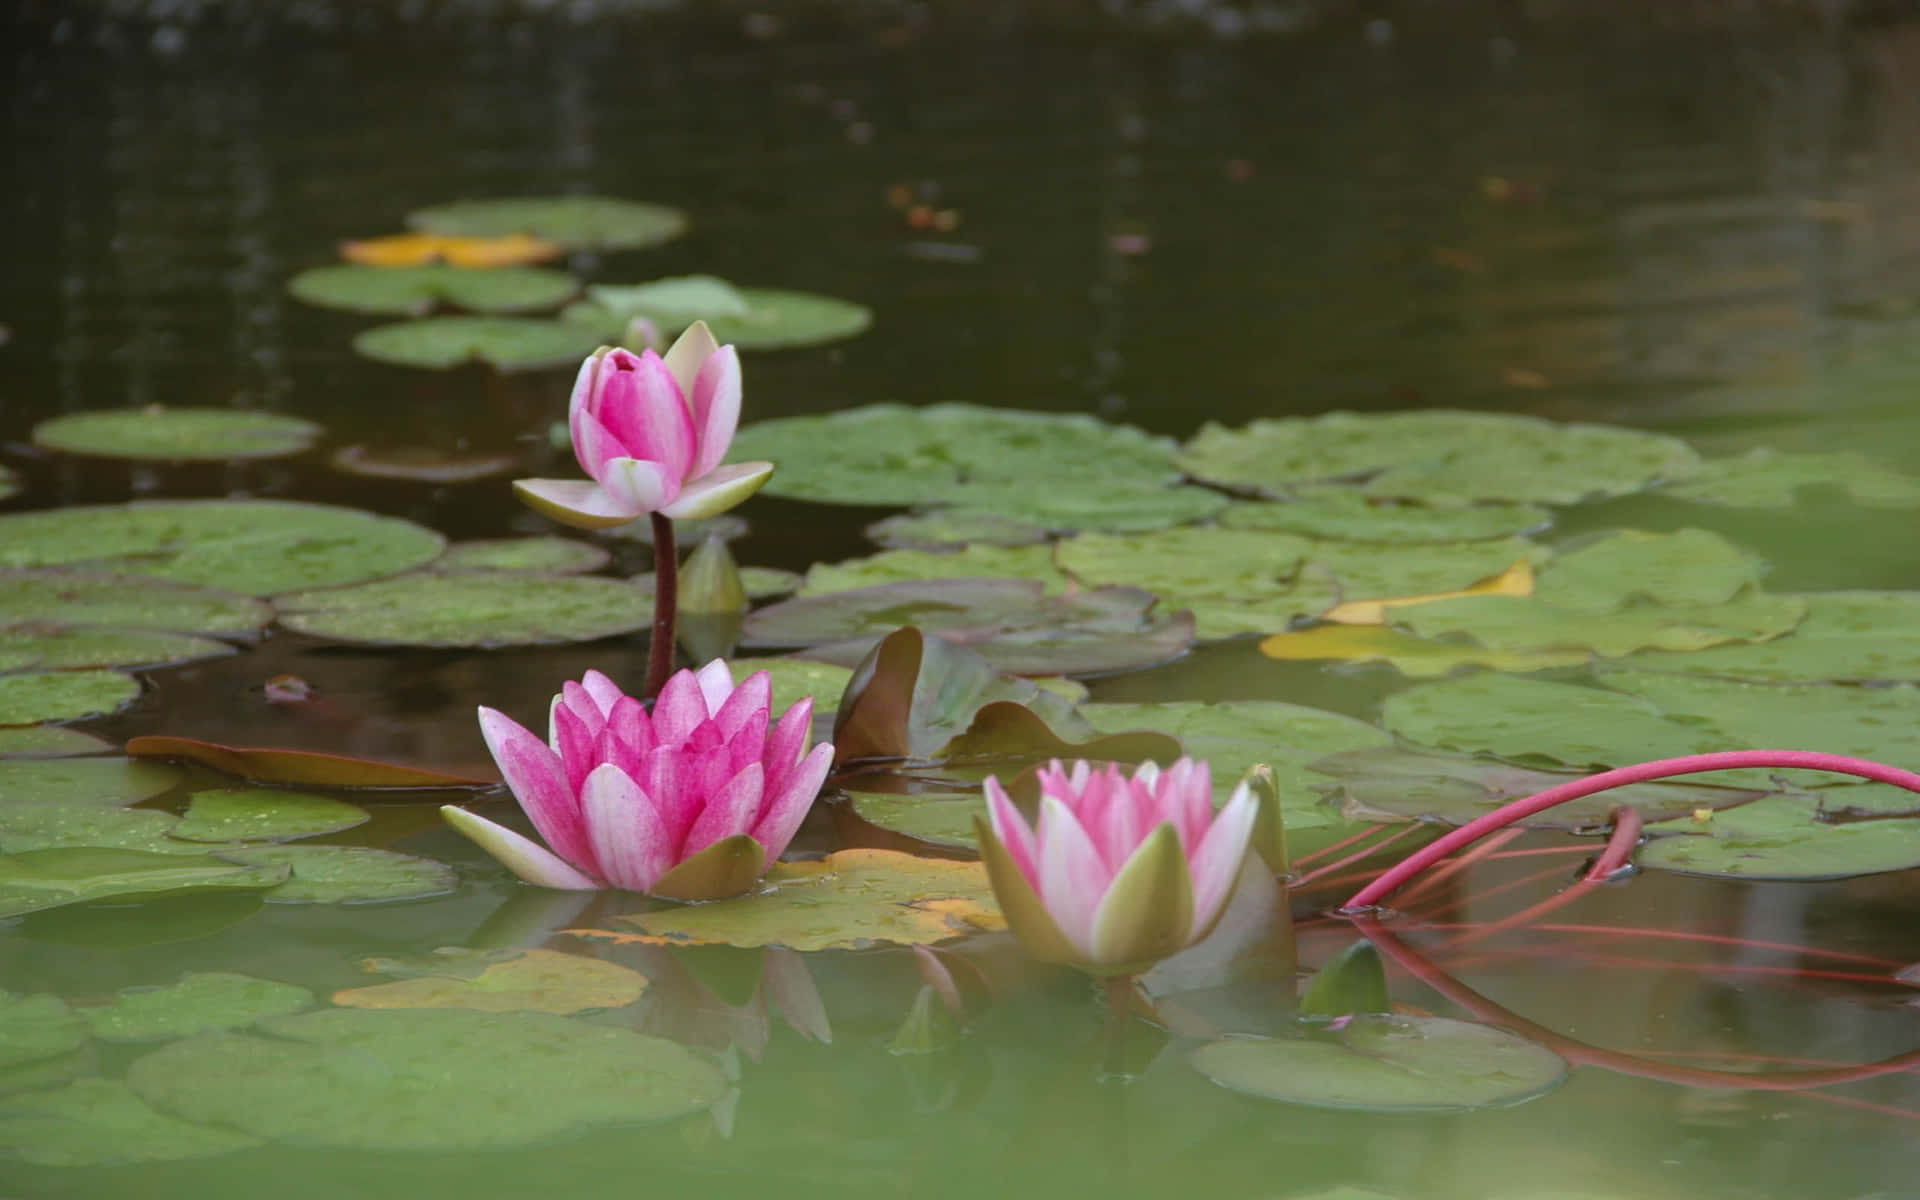 A solitary pink lotus blossoming in a peaceful pond.